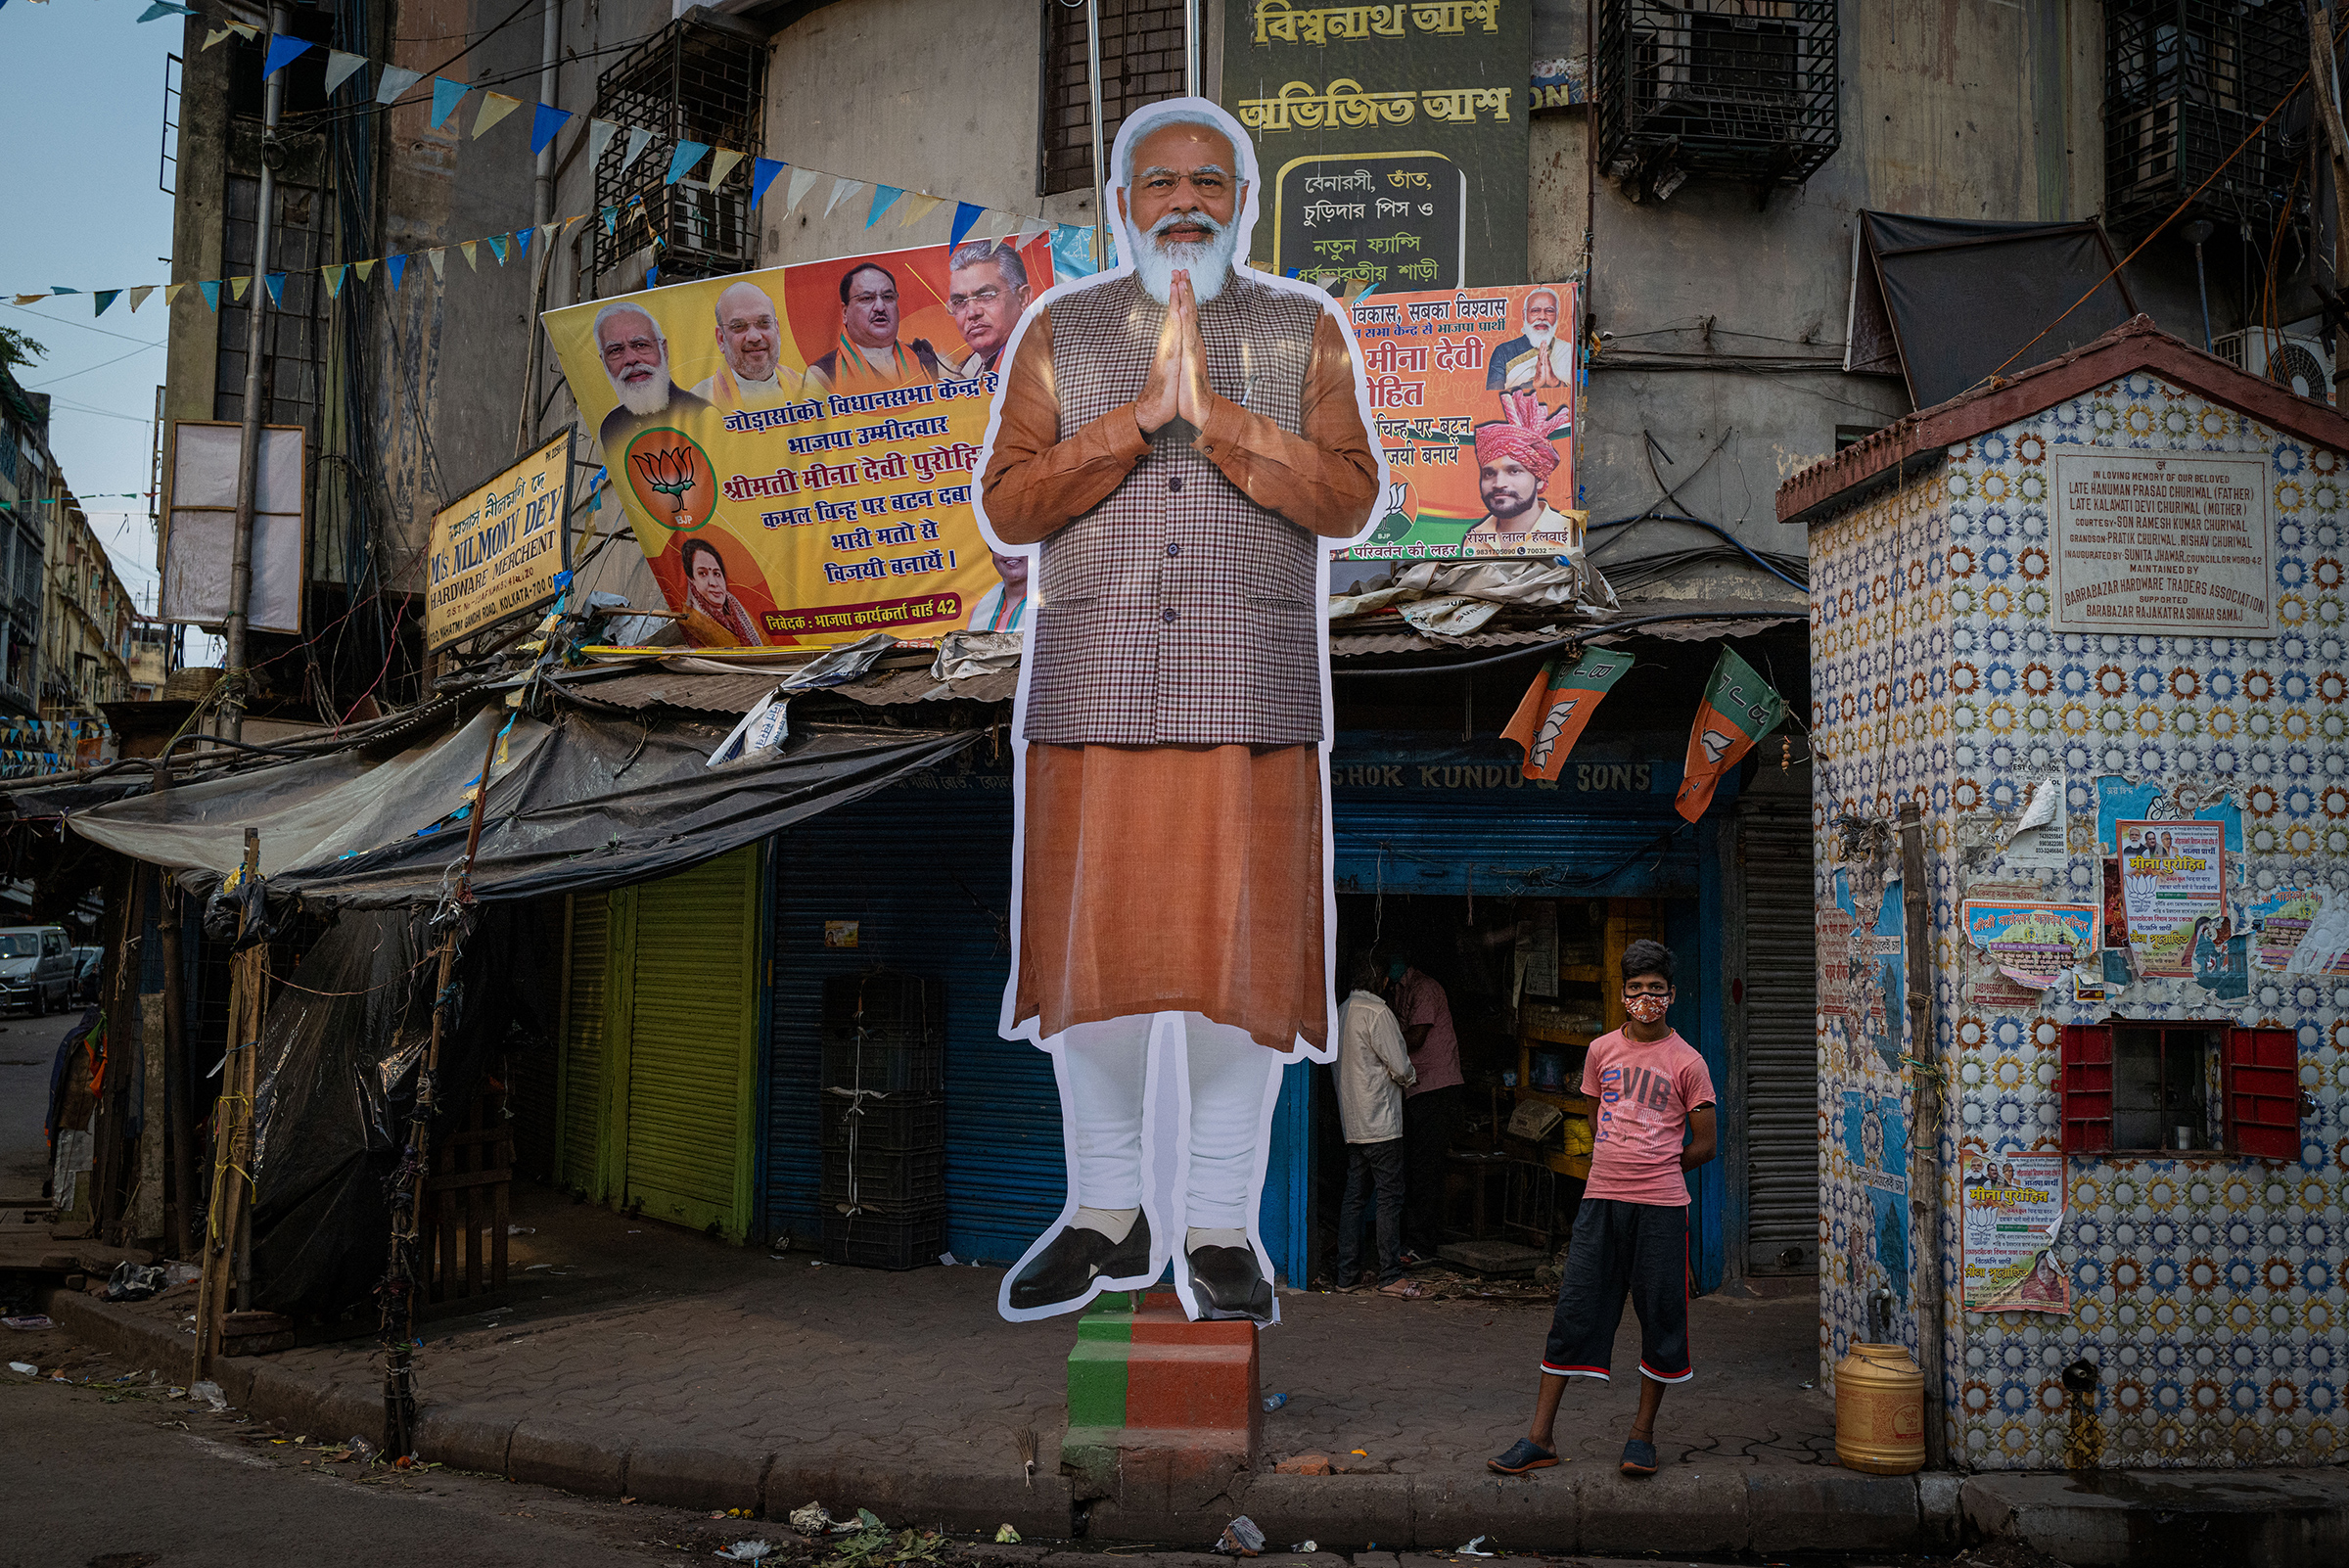 A cut-out depicting Indian Prime Minister Narendra Modi in the streets of Kolkata, in the state of West Bengal, on April 25, 2021. Voters in the state recently handed him a resounding defeat.